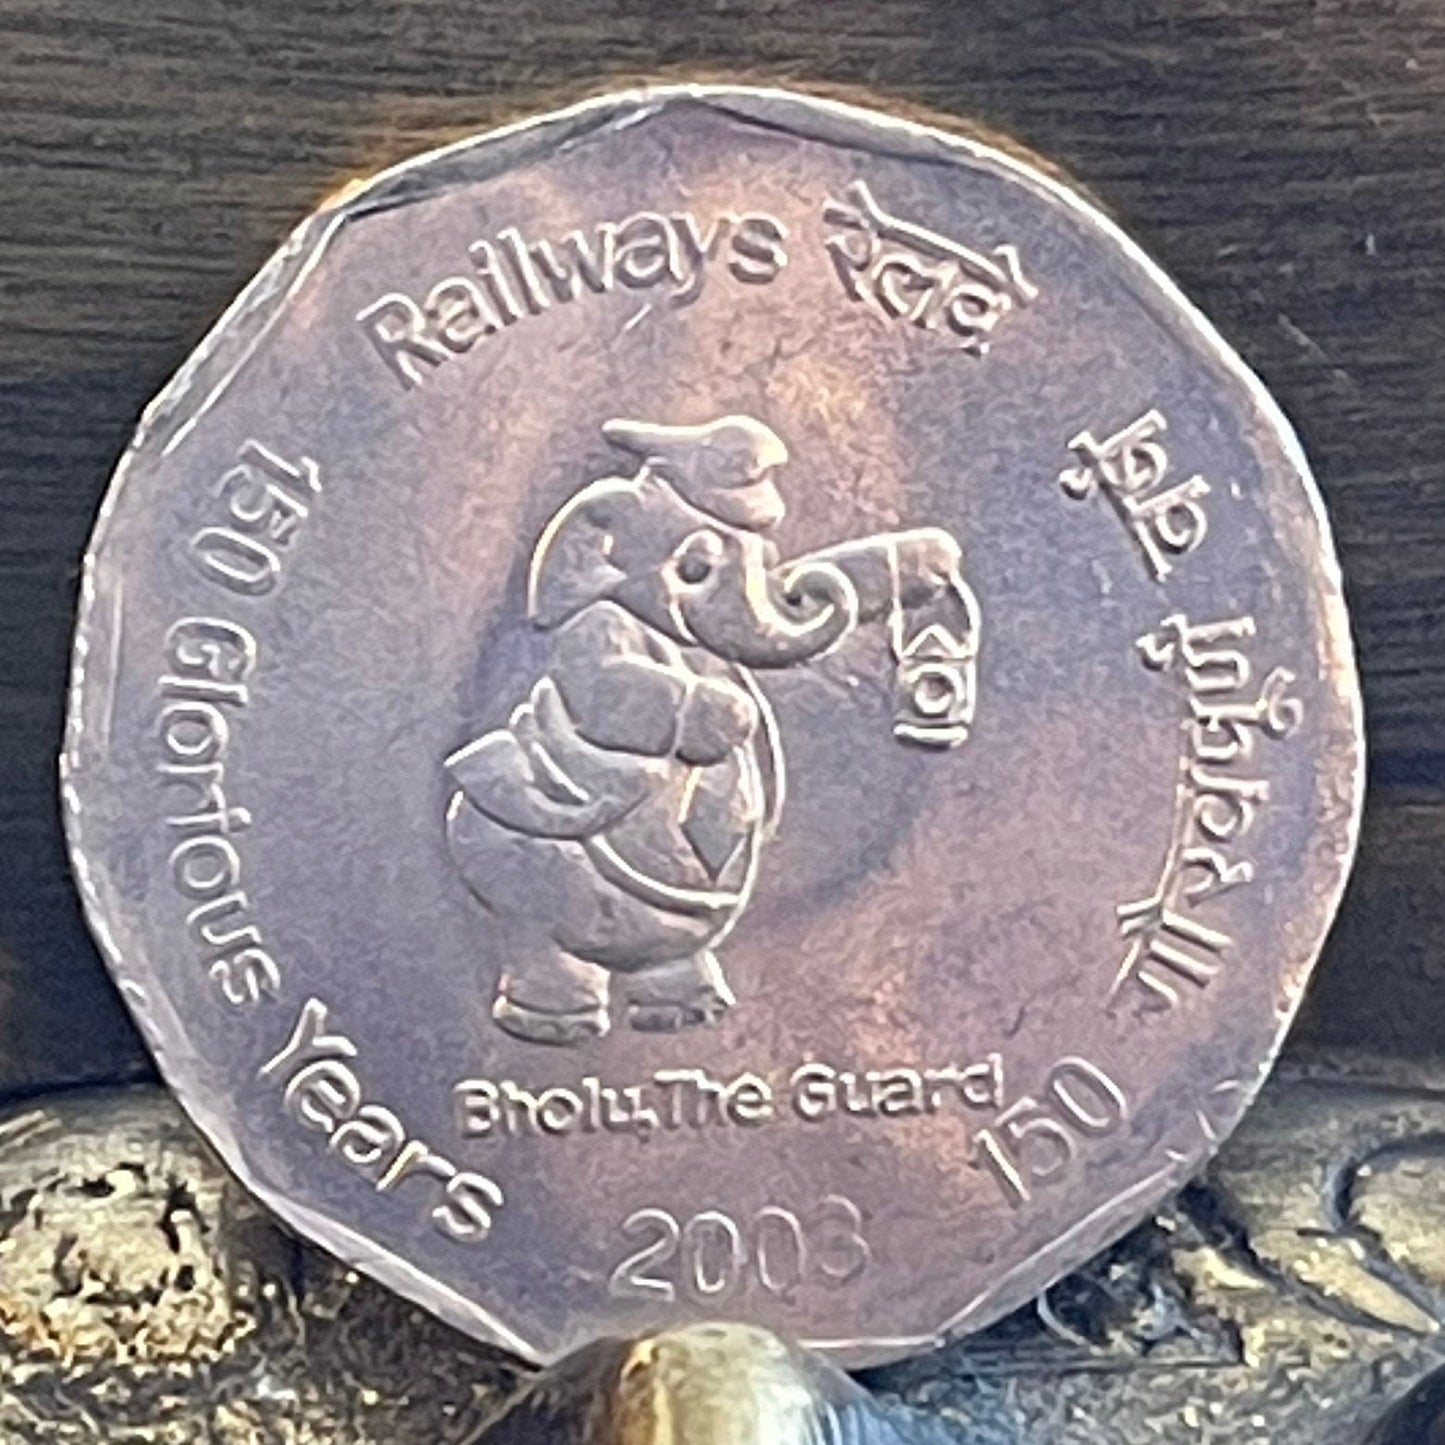 Bholu Elephant Railway Mascot & Ashoka Lion Capitol 2 Rupees India Authentic Coin Money for Jewelry and Craft Making